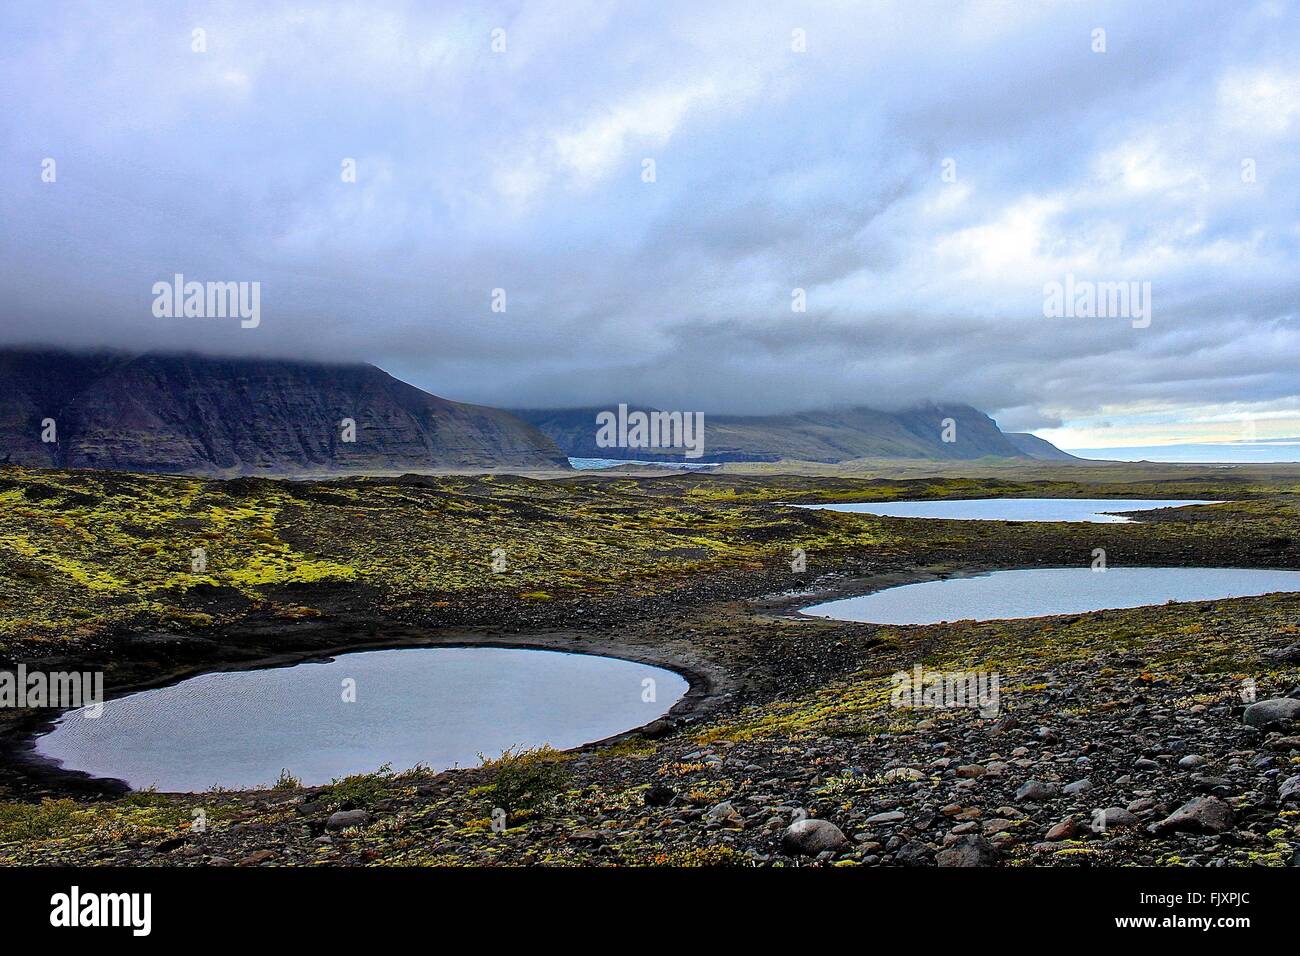 Scenic View Of Ponds On Field Against Cloudy Sky Stock Photo